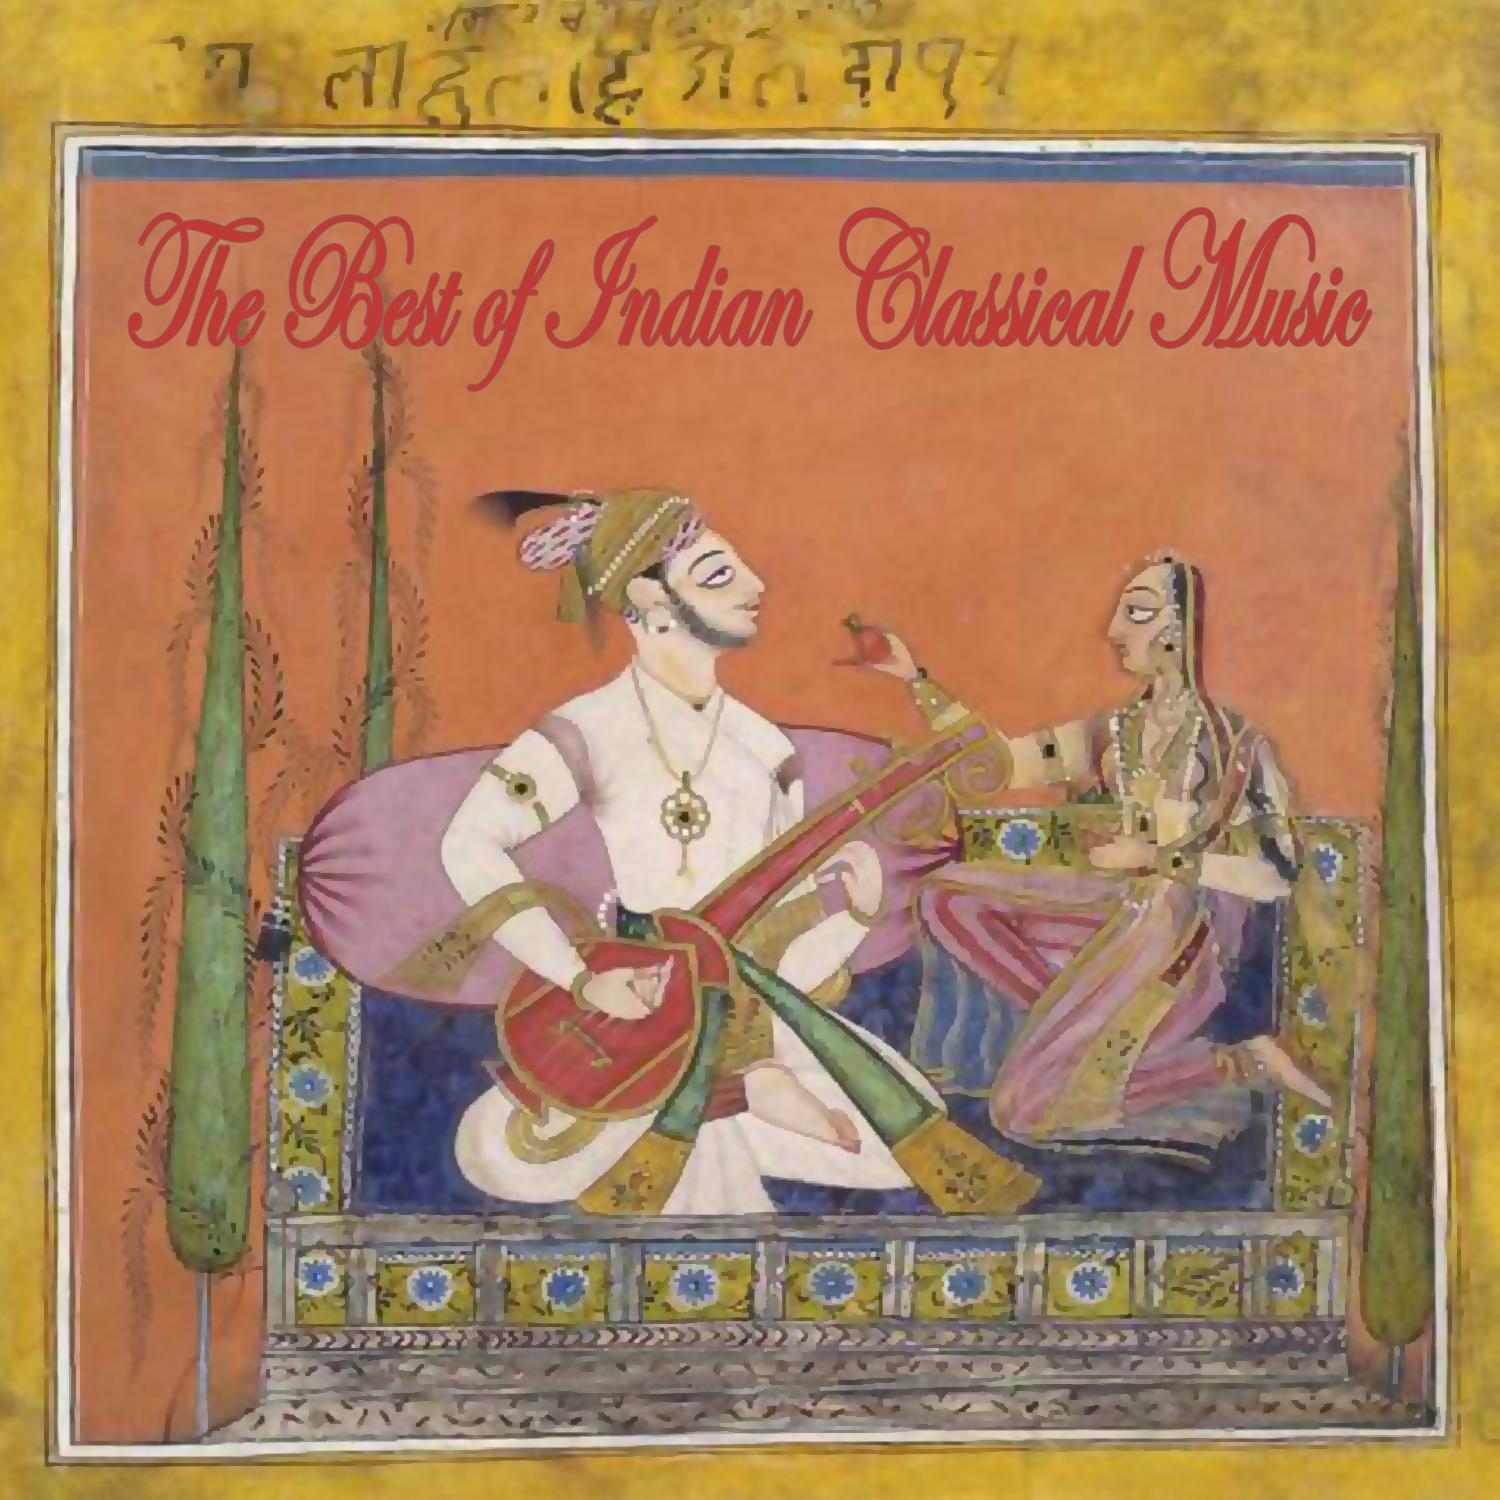 The Best Of Indian Classical Music